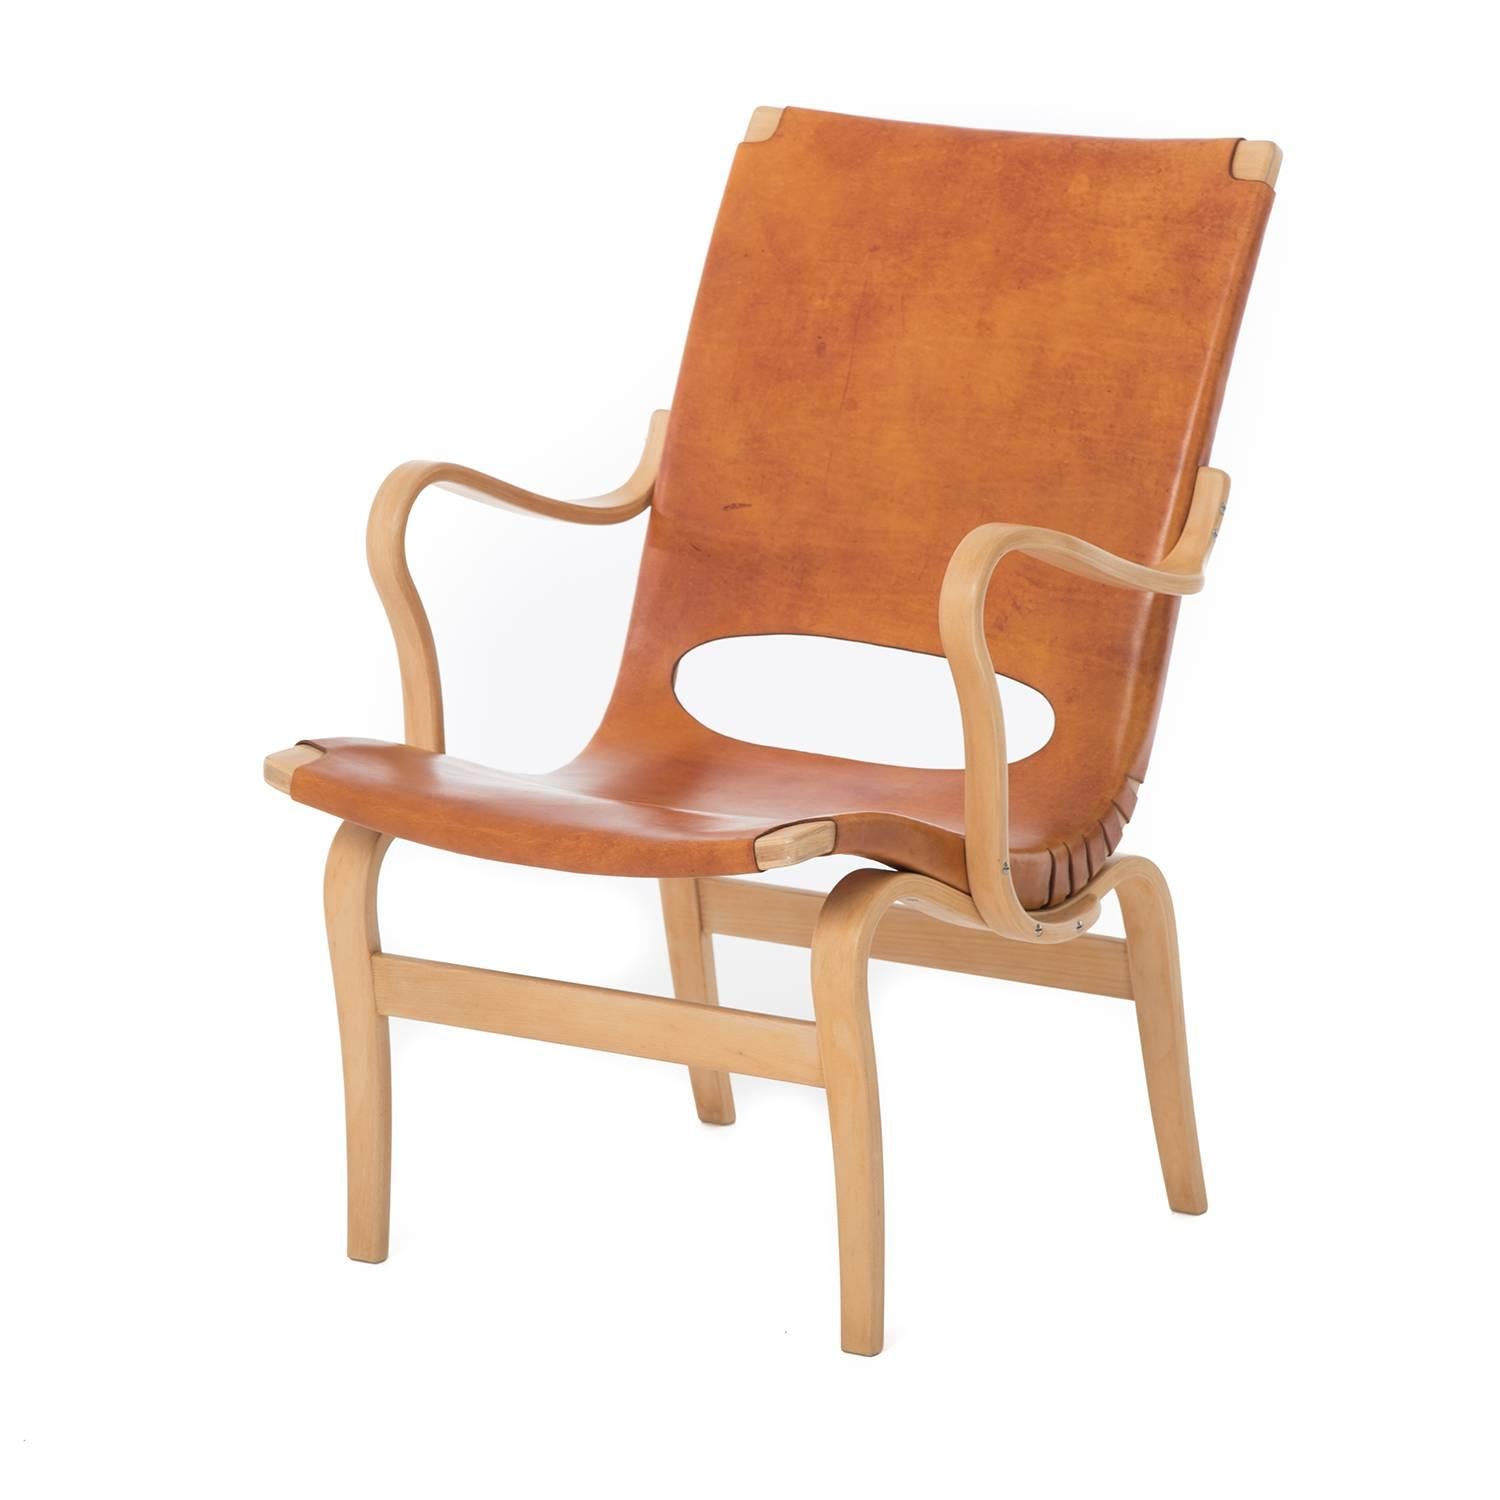 A Classic and lovely design by Bruno Matheson. New hand tanned leather sling seat as per original, completely useable or sitable and easily placeable, adding Classic modernist elegance to any space. 

Professional, skilled furniture restoration is